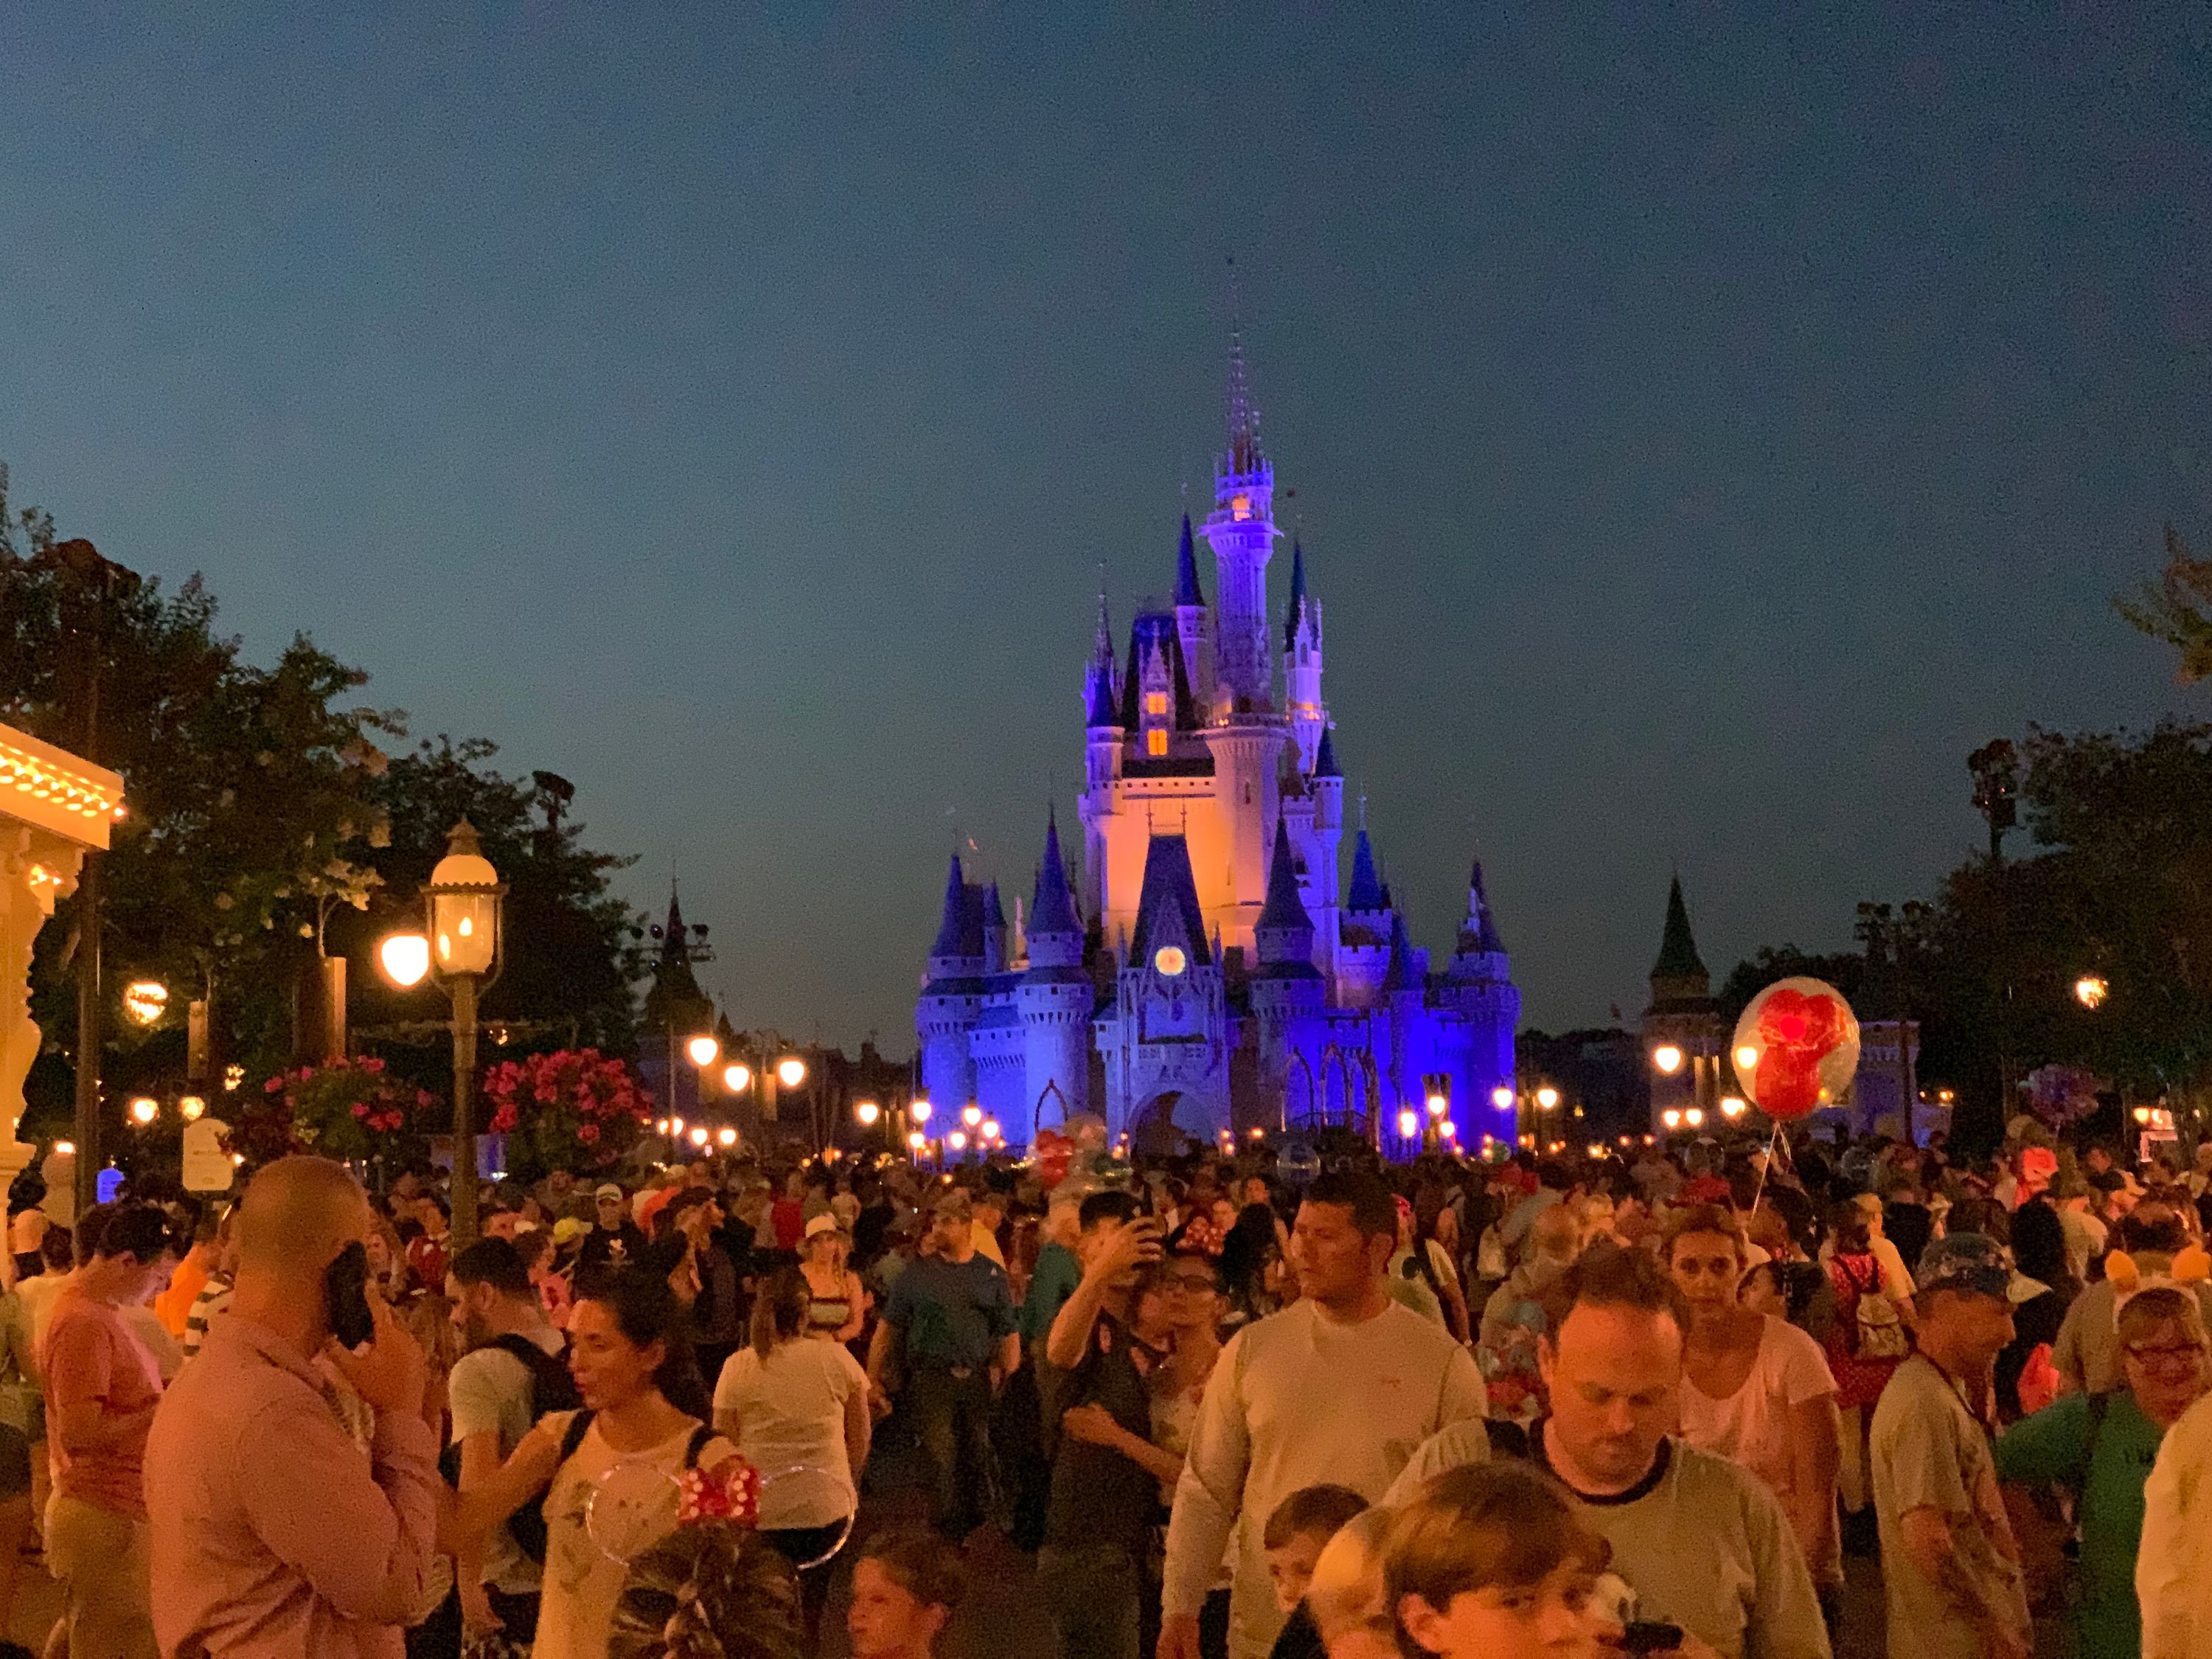 Cinderella’s Castle is lit up at night behind a crowd of people on Disney World’s Main Street USA.